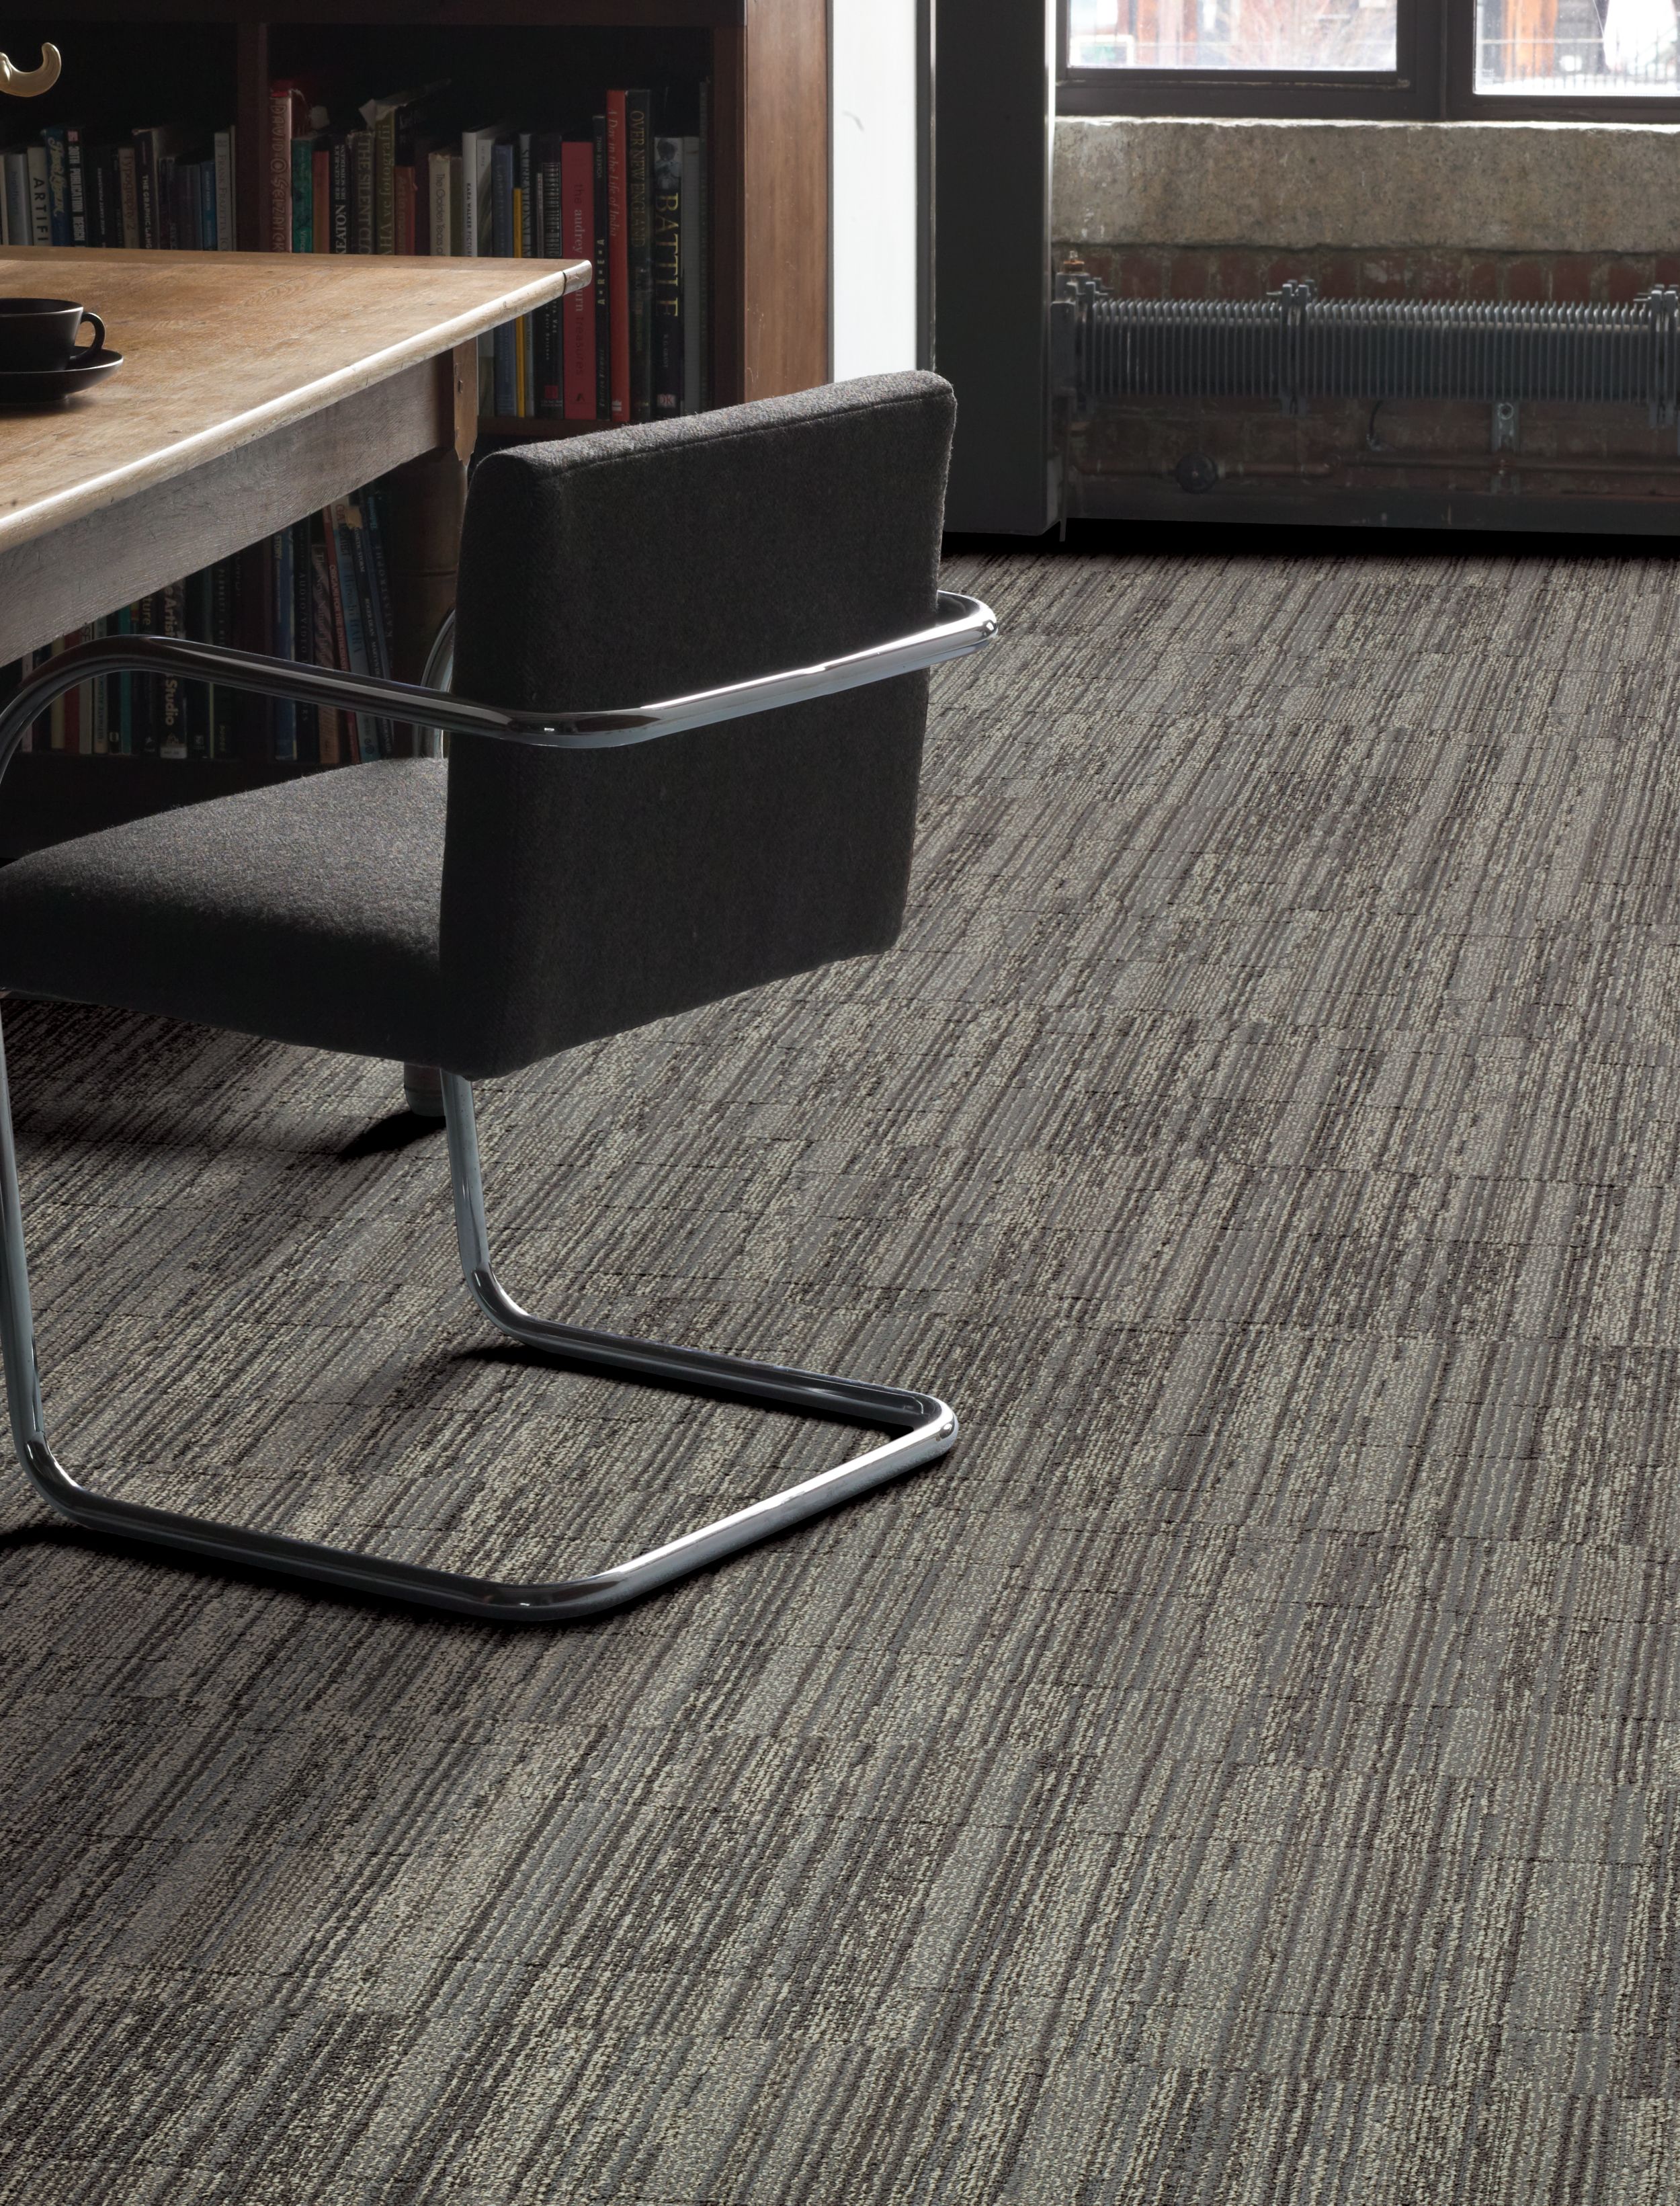 Interface Permian carept tile in private office area with desk and chair numéro d’image 9